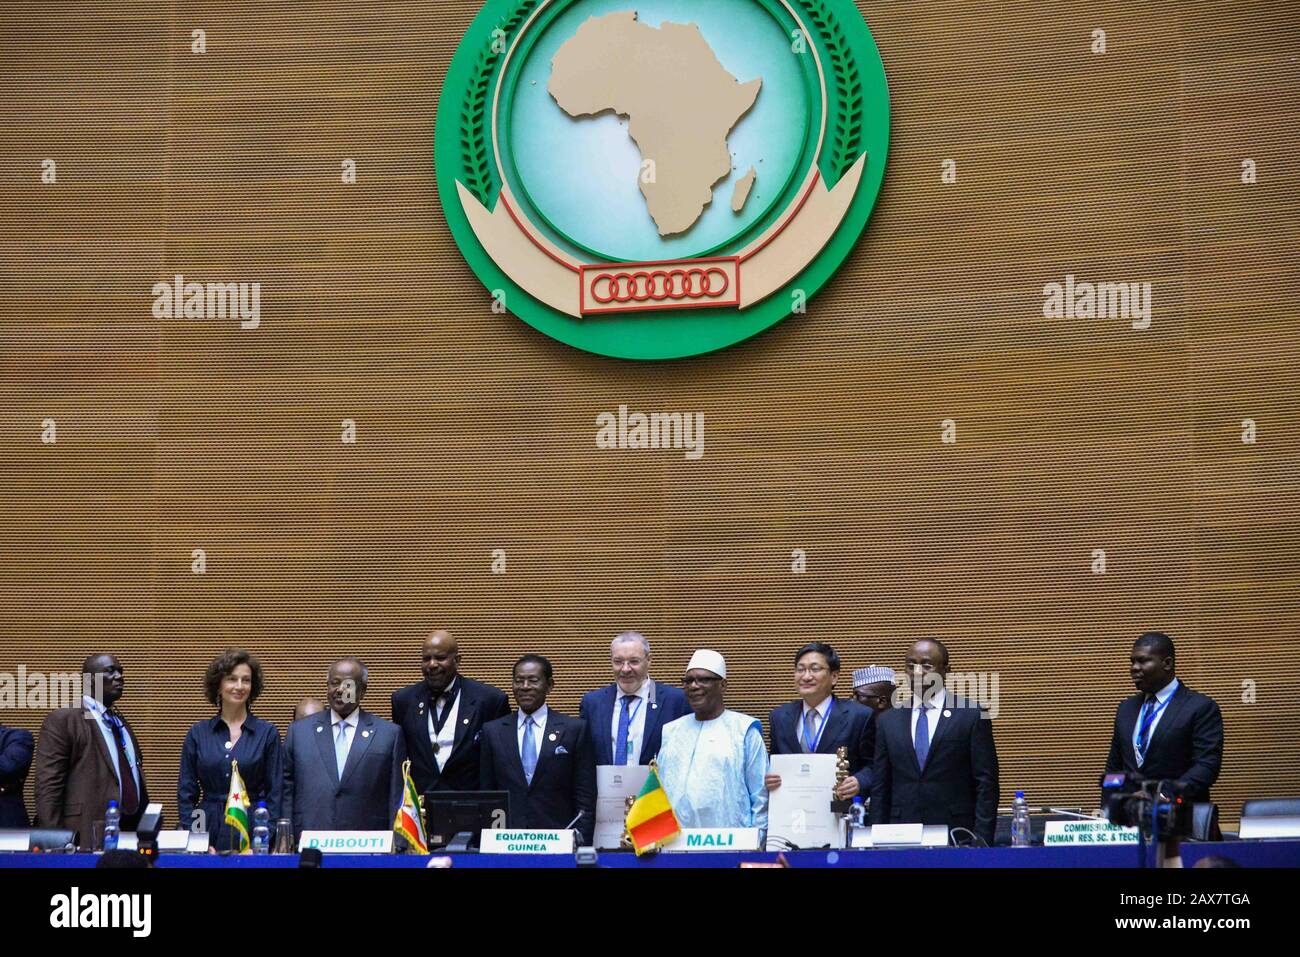 Addis Ababa, Ethiopia. 10th Feb, 2020. Officials of UNESCO and African Union pose for photo with prize winners and representatives in Addis Ababa, Ethiopia, Feb. 10, 2020. Chinese Nobel laureate Tu Youyou has been awarded the UNESCO-Equatorial Guinea International Prize for Research in the Life Sciences for her research into parasitic diseases. Credit: Michael Tewelde/Xinhua/Alamy Live News Stock Photo